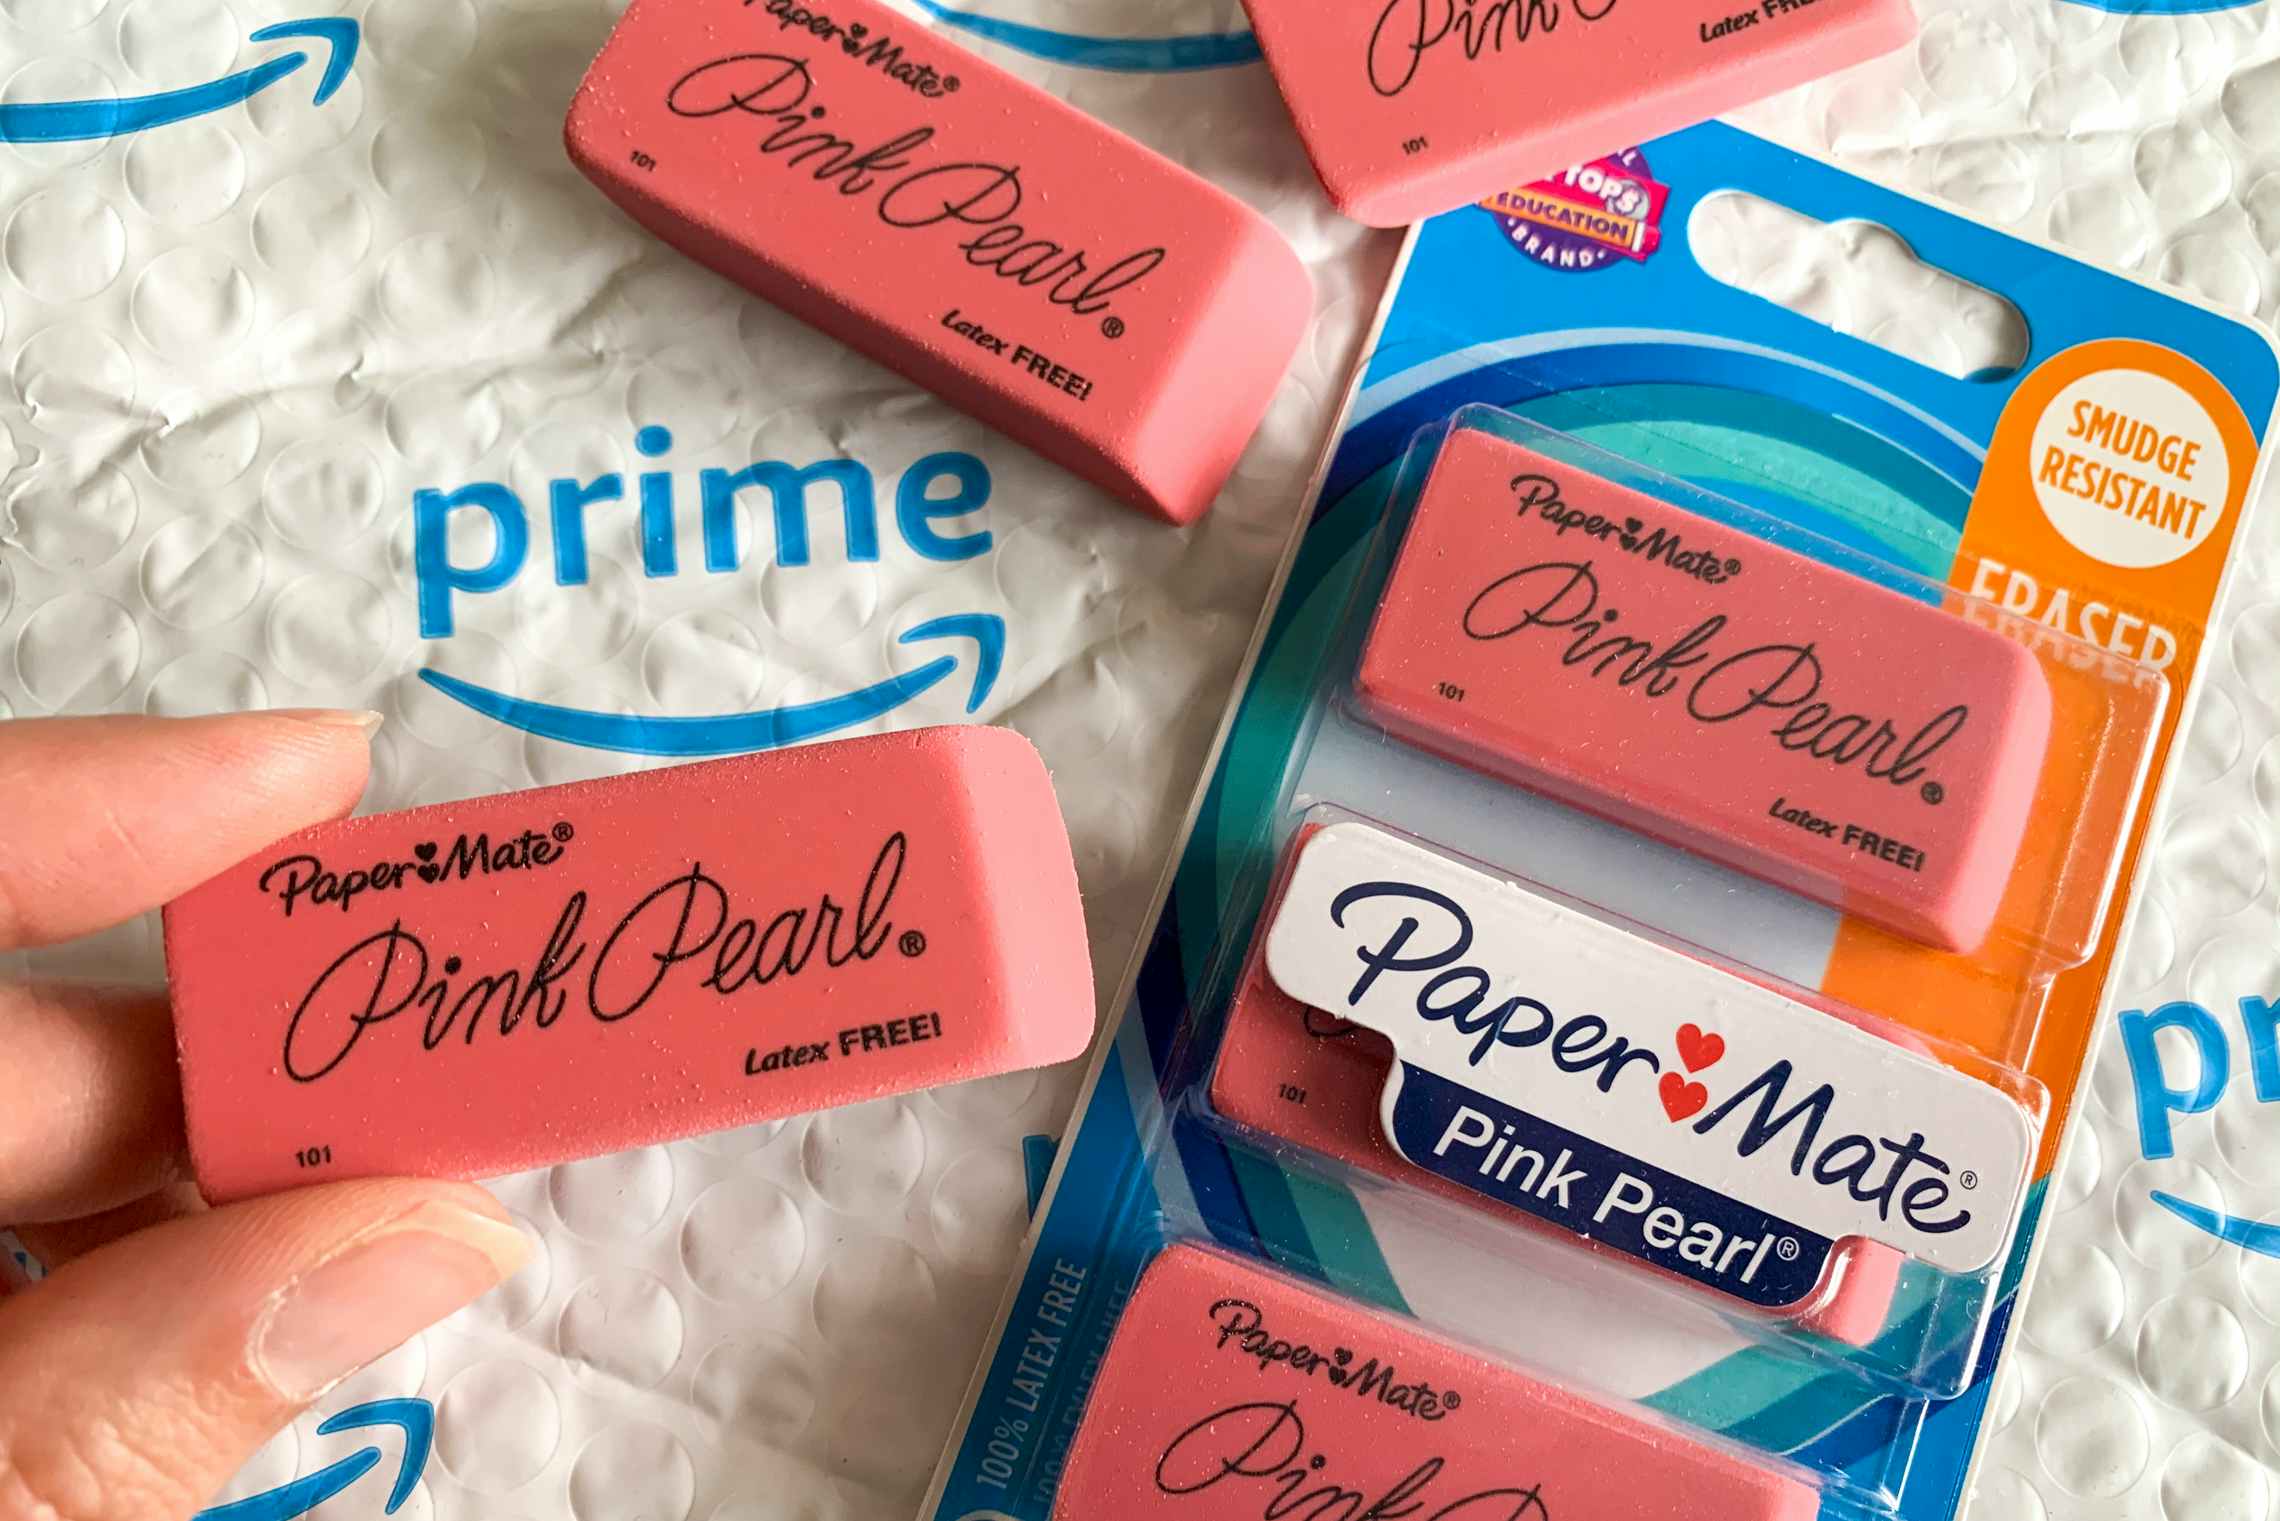 Paper Mate Pink Pearl erasers on top of an Amazon prime envelope.